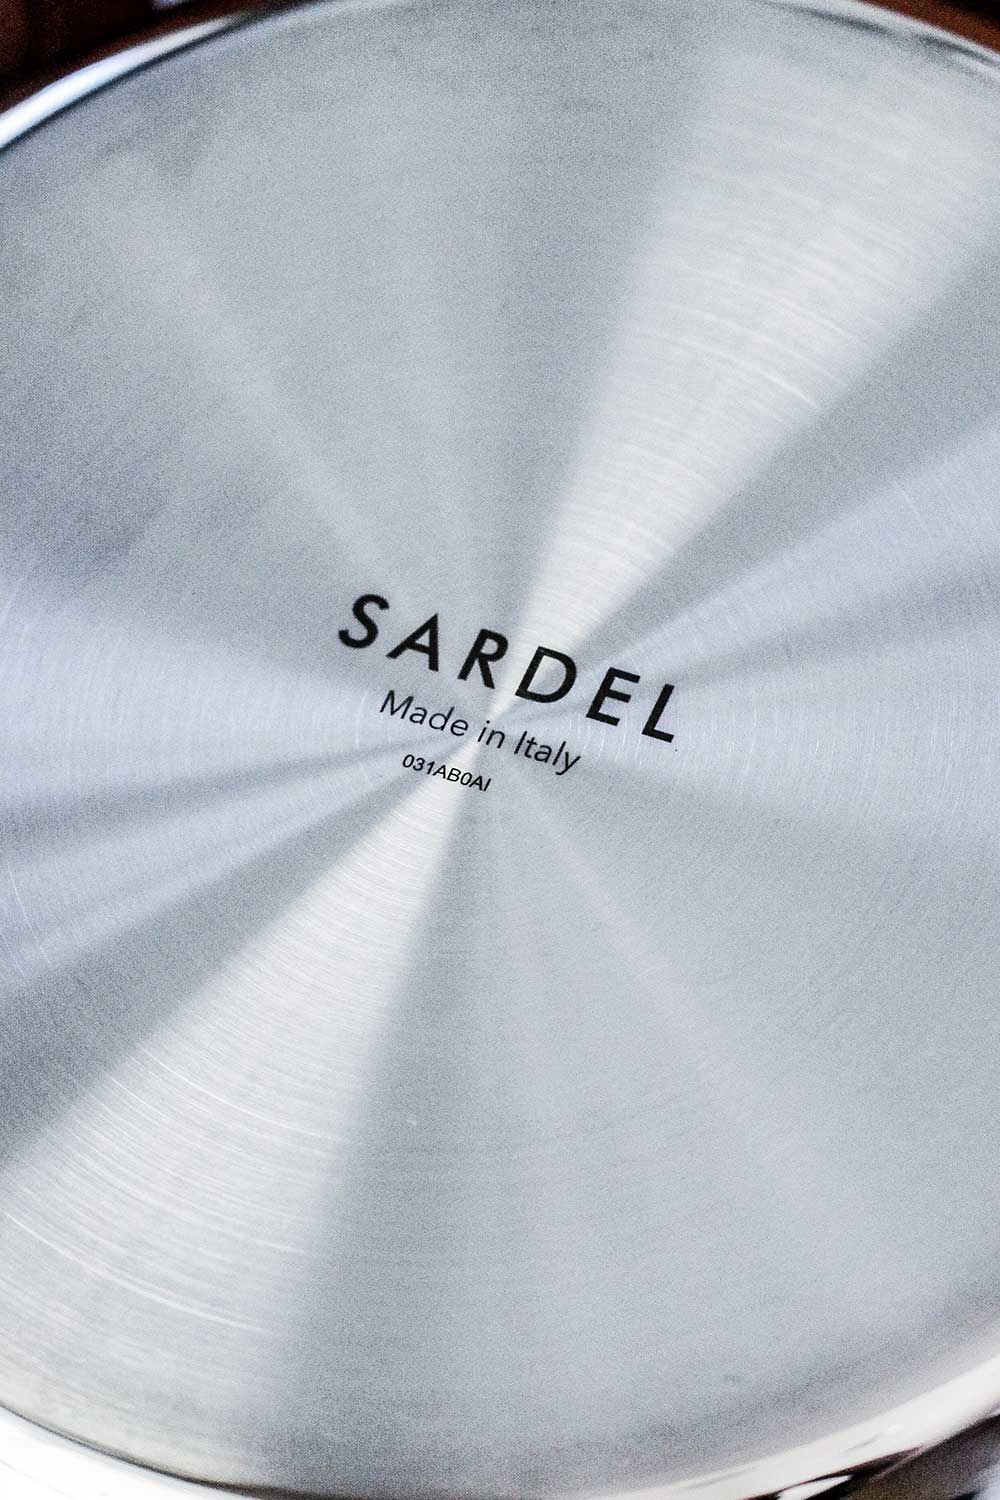 A Sardel saucepan turned upside down to see the logo on the bottom of the pan. 